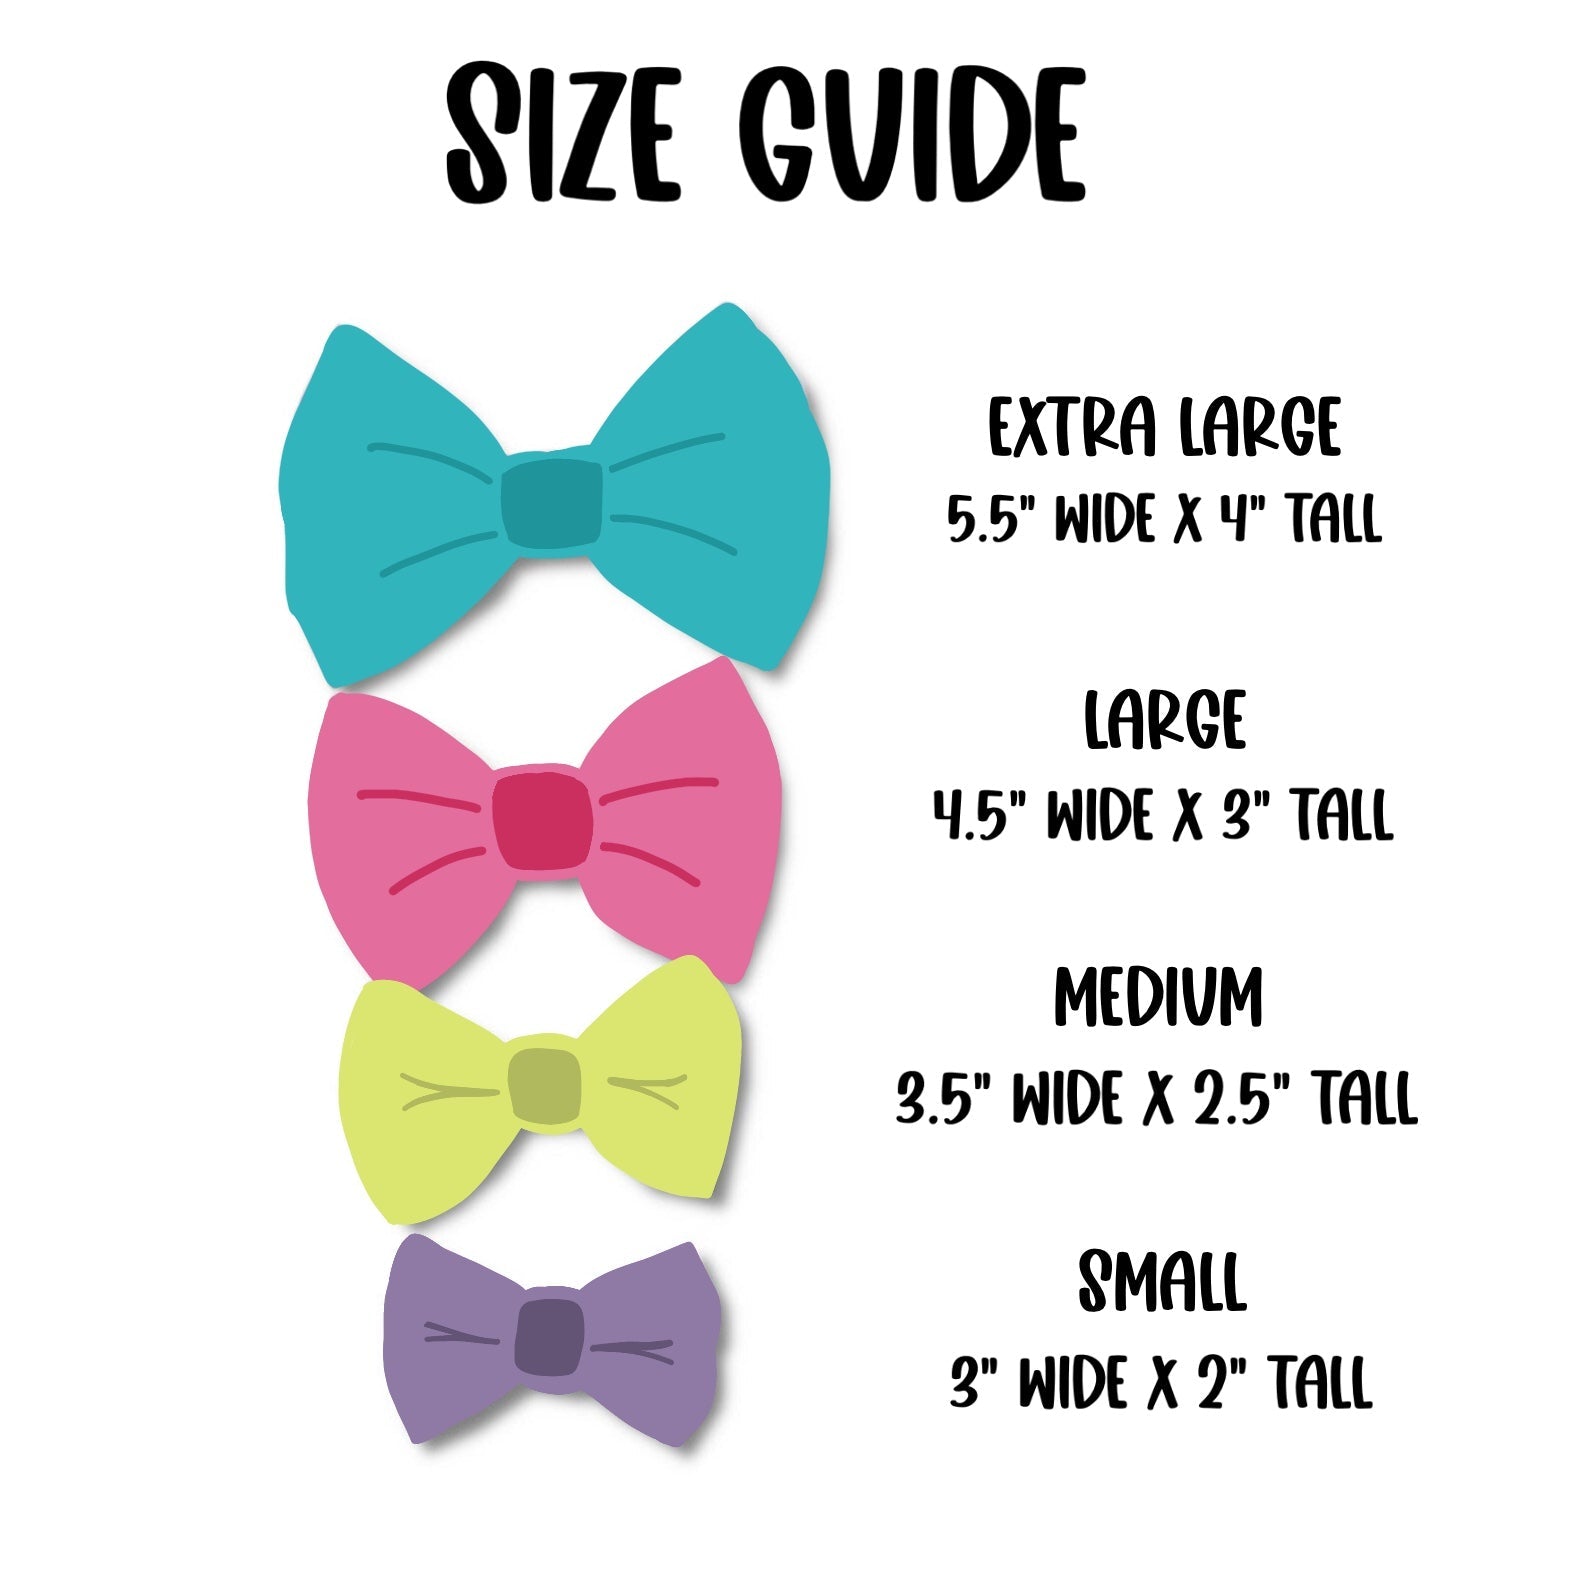 Pick Your Print Bow Tie - The Paw Pack Goods